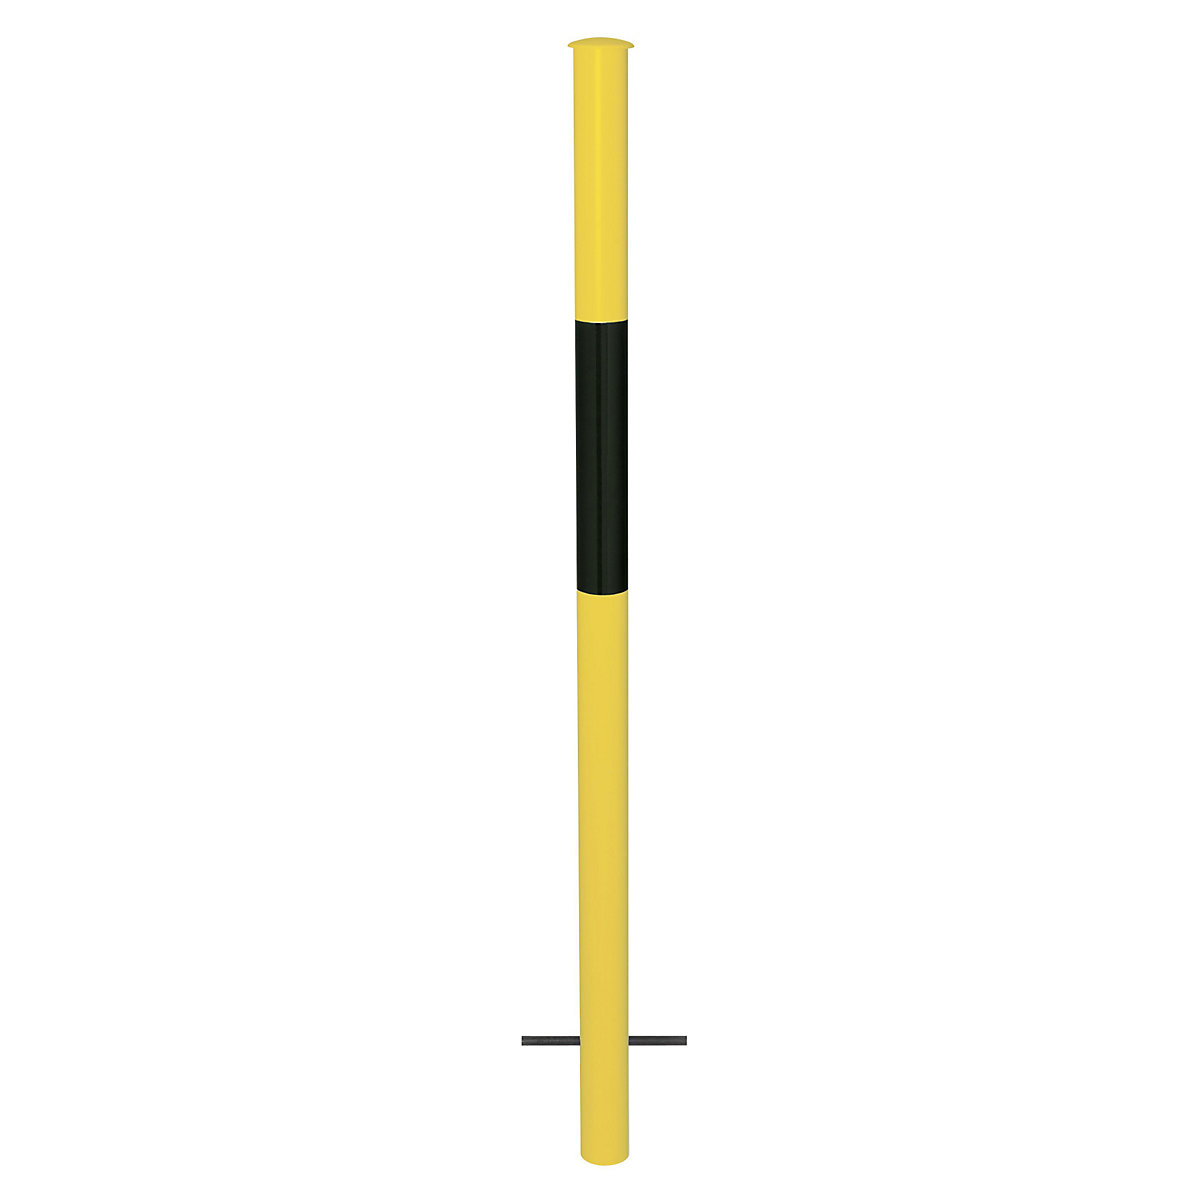 Railing system, upright for setting in concrete, yellow/black